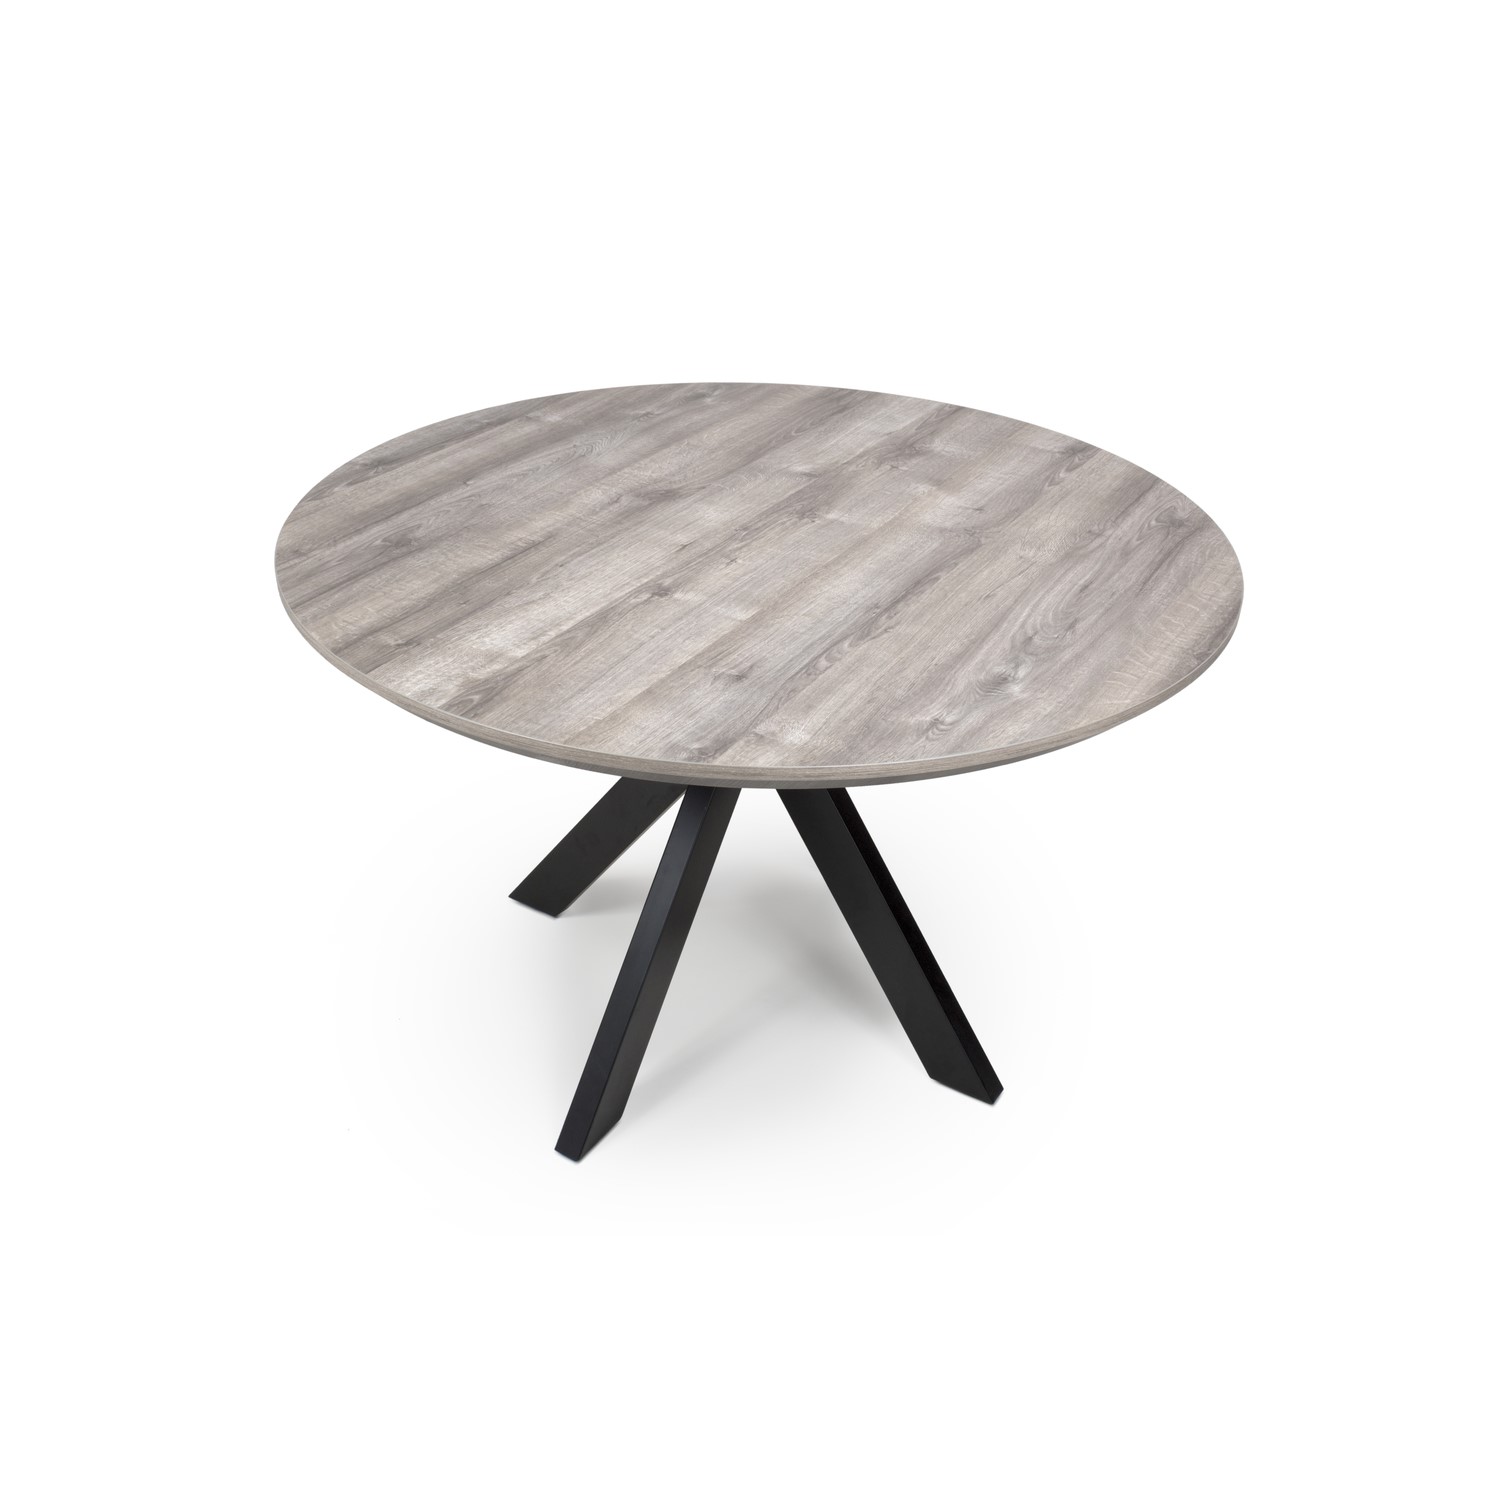 Read more about Round grey wood dining table seats 6 liberty